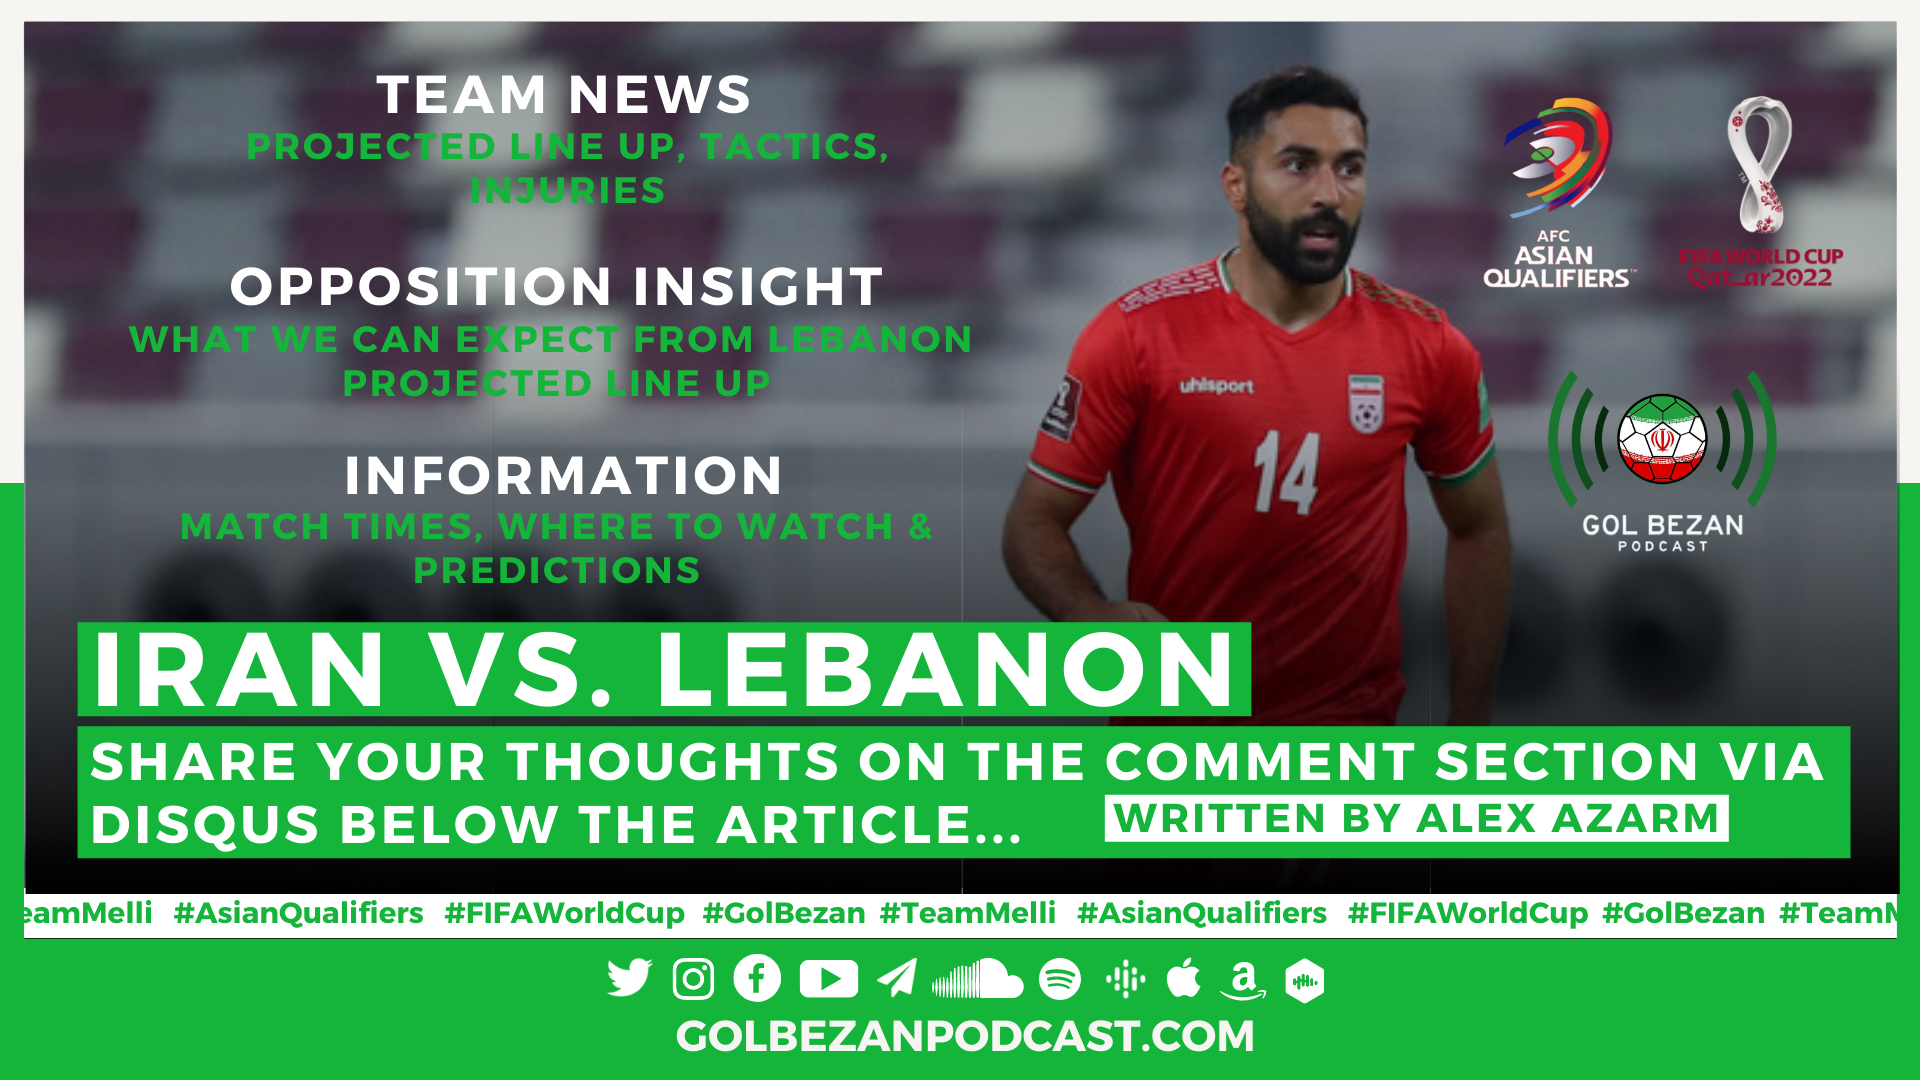 PREVIEW: Iran vs. Lebanon | 2022 World Cup Qualifiers - Team News, Opposition Insight, Predictions and More